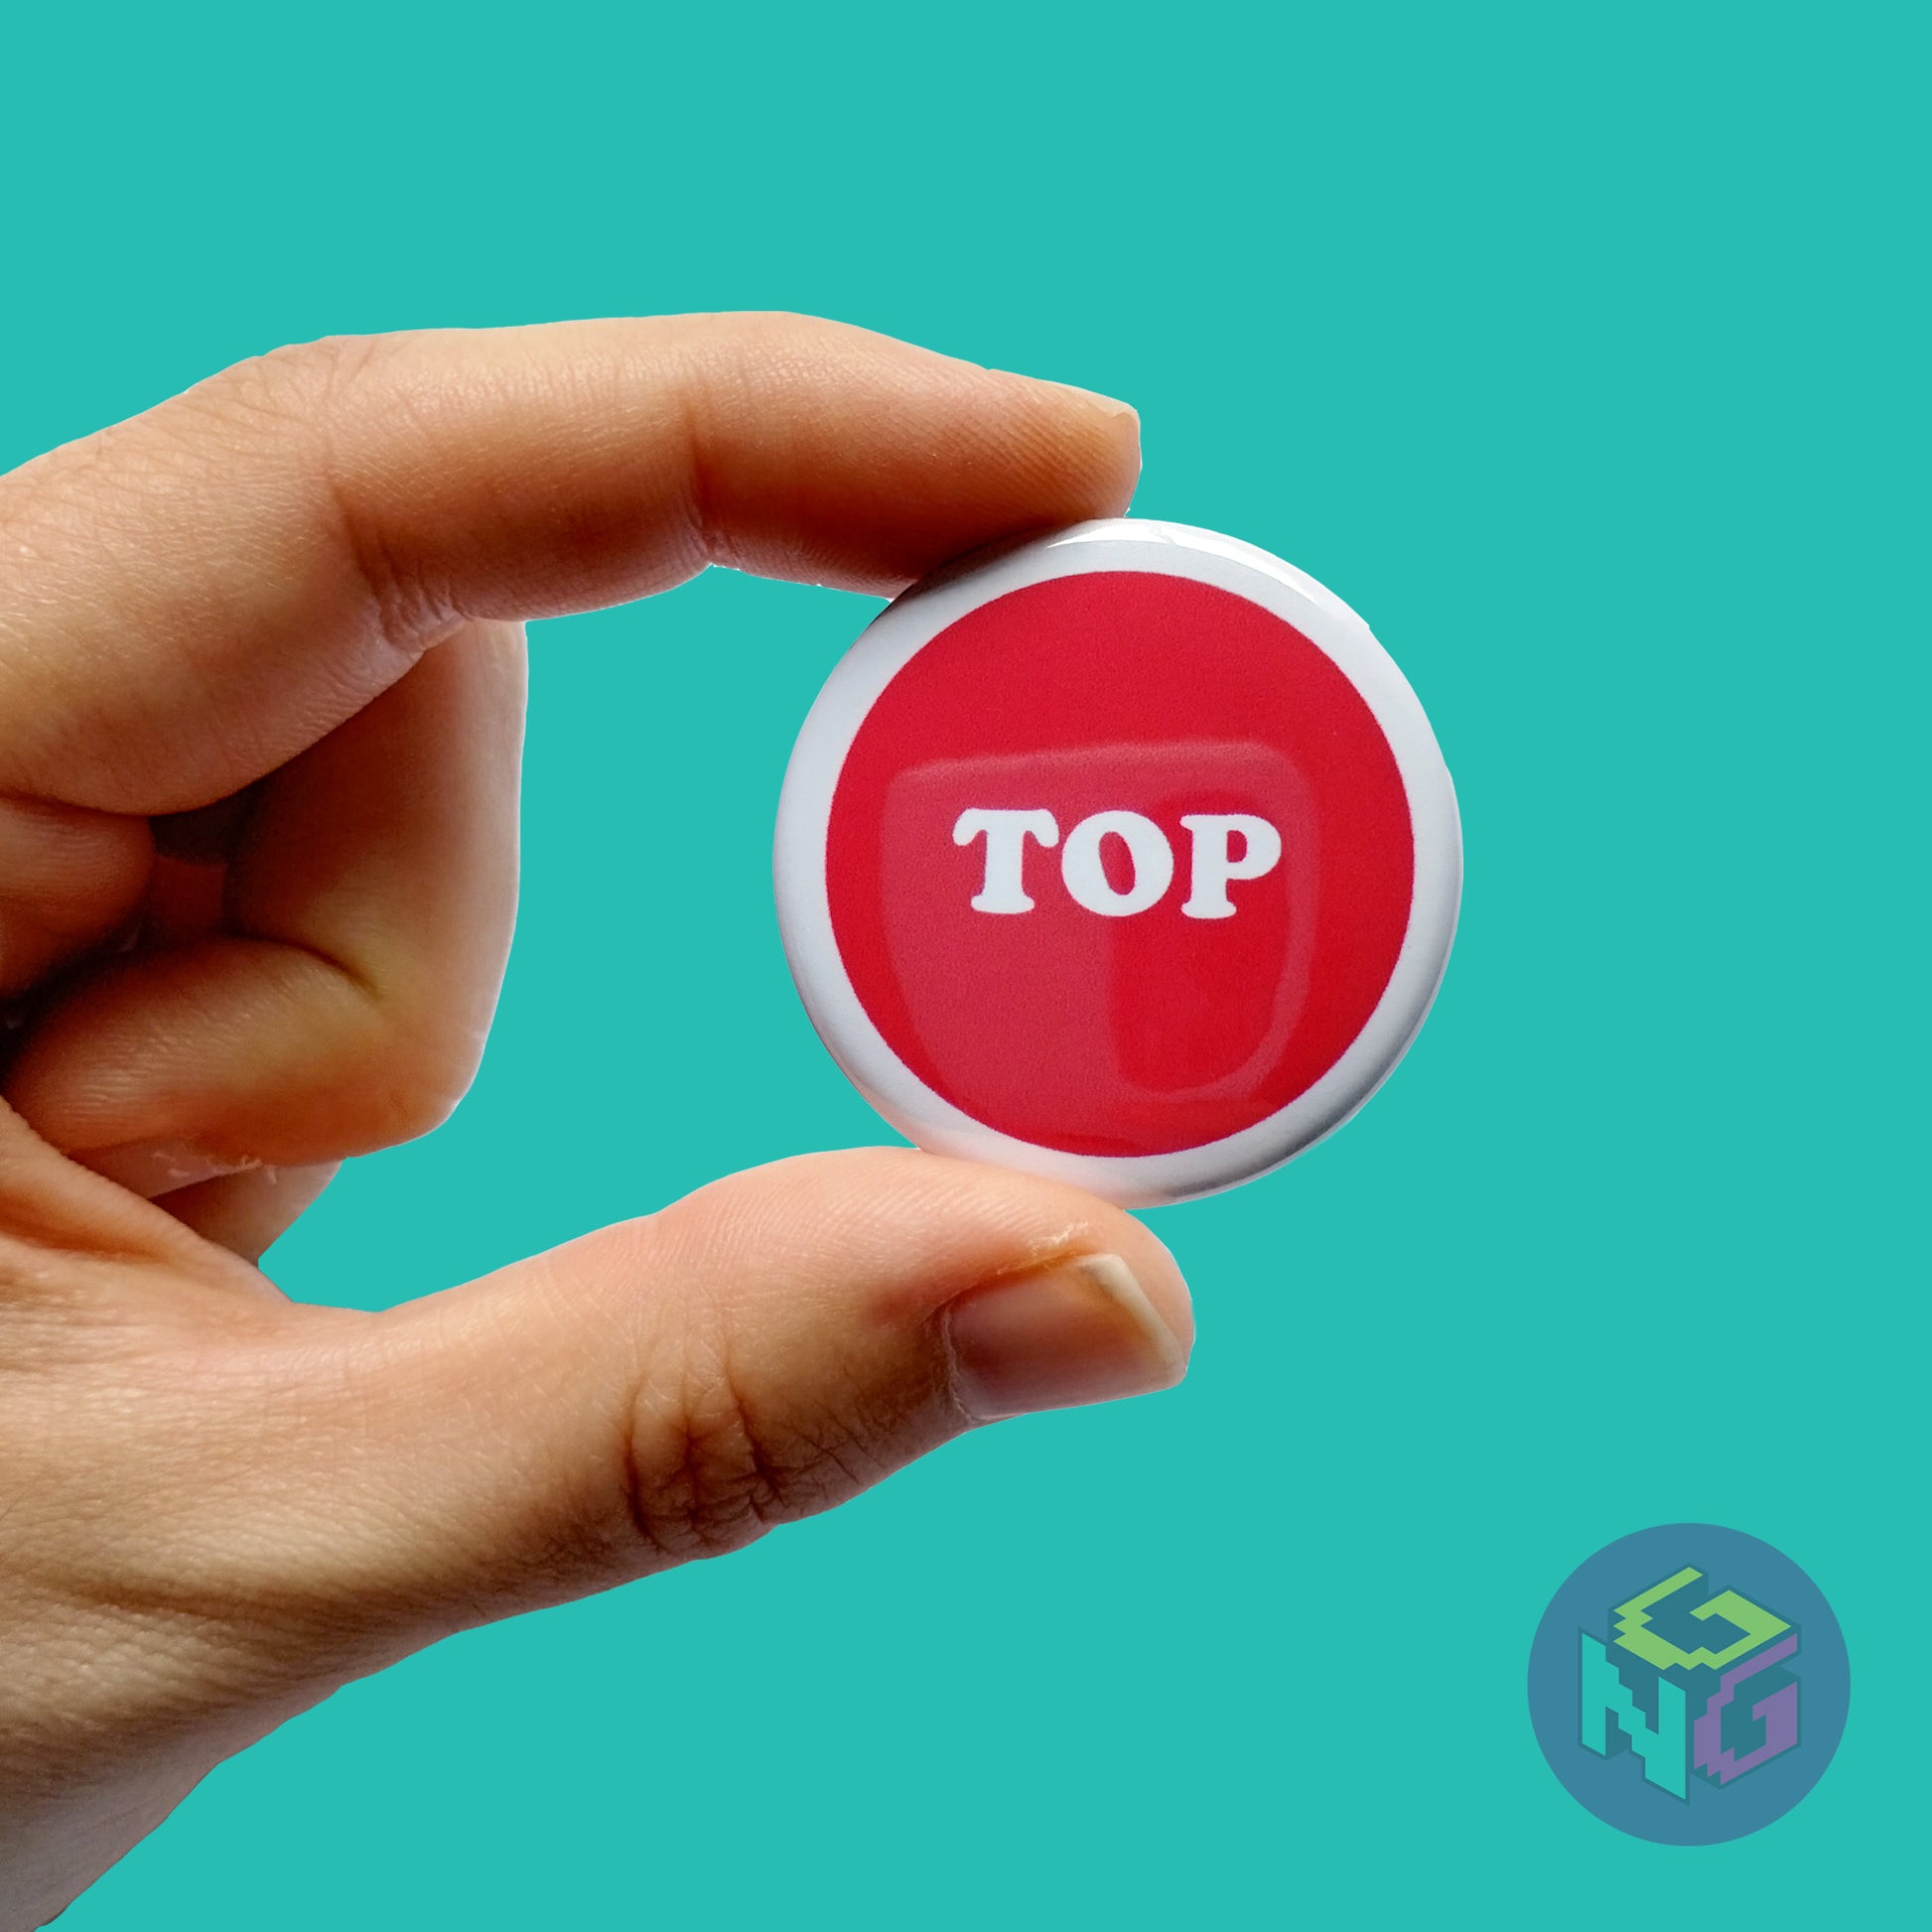 red top button held in hand on mint green background